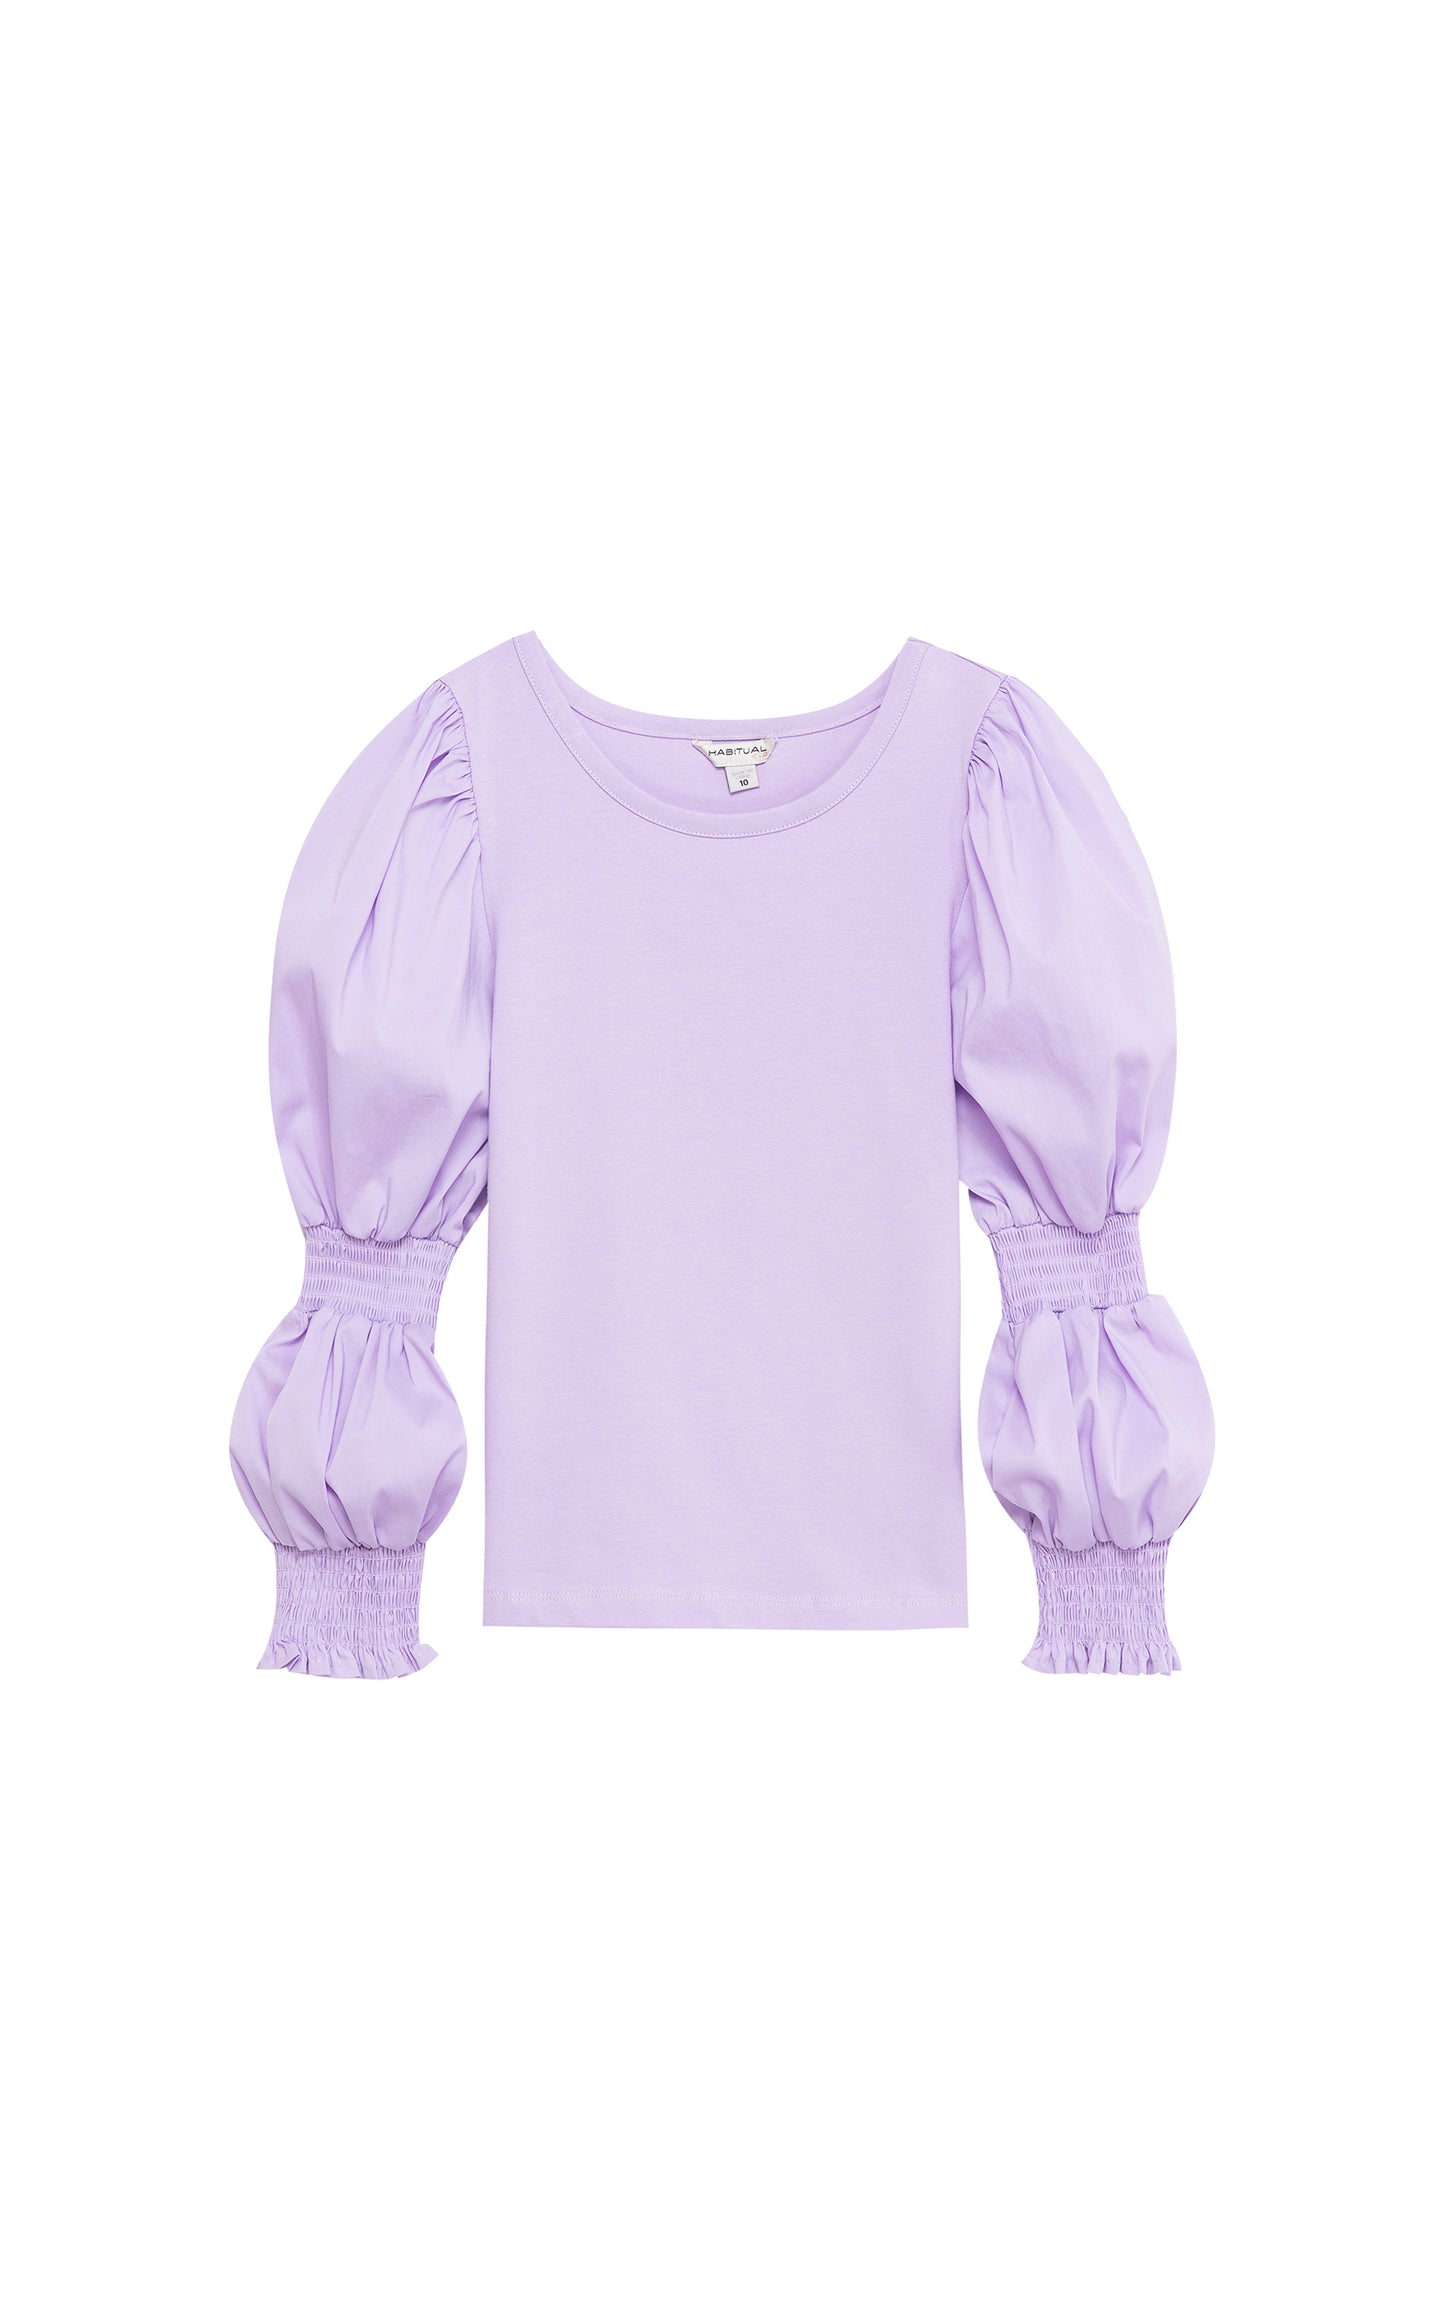 LIGHT PURPLE LONG-SLEEVE TOP WITH SMOCKING ALONG THE SLEEVES